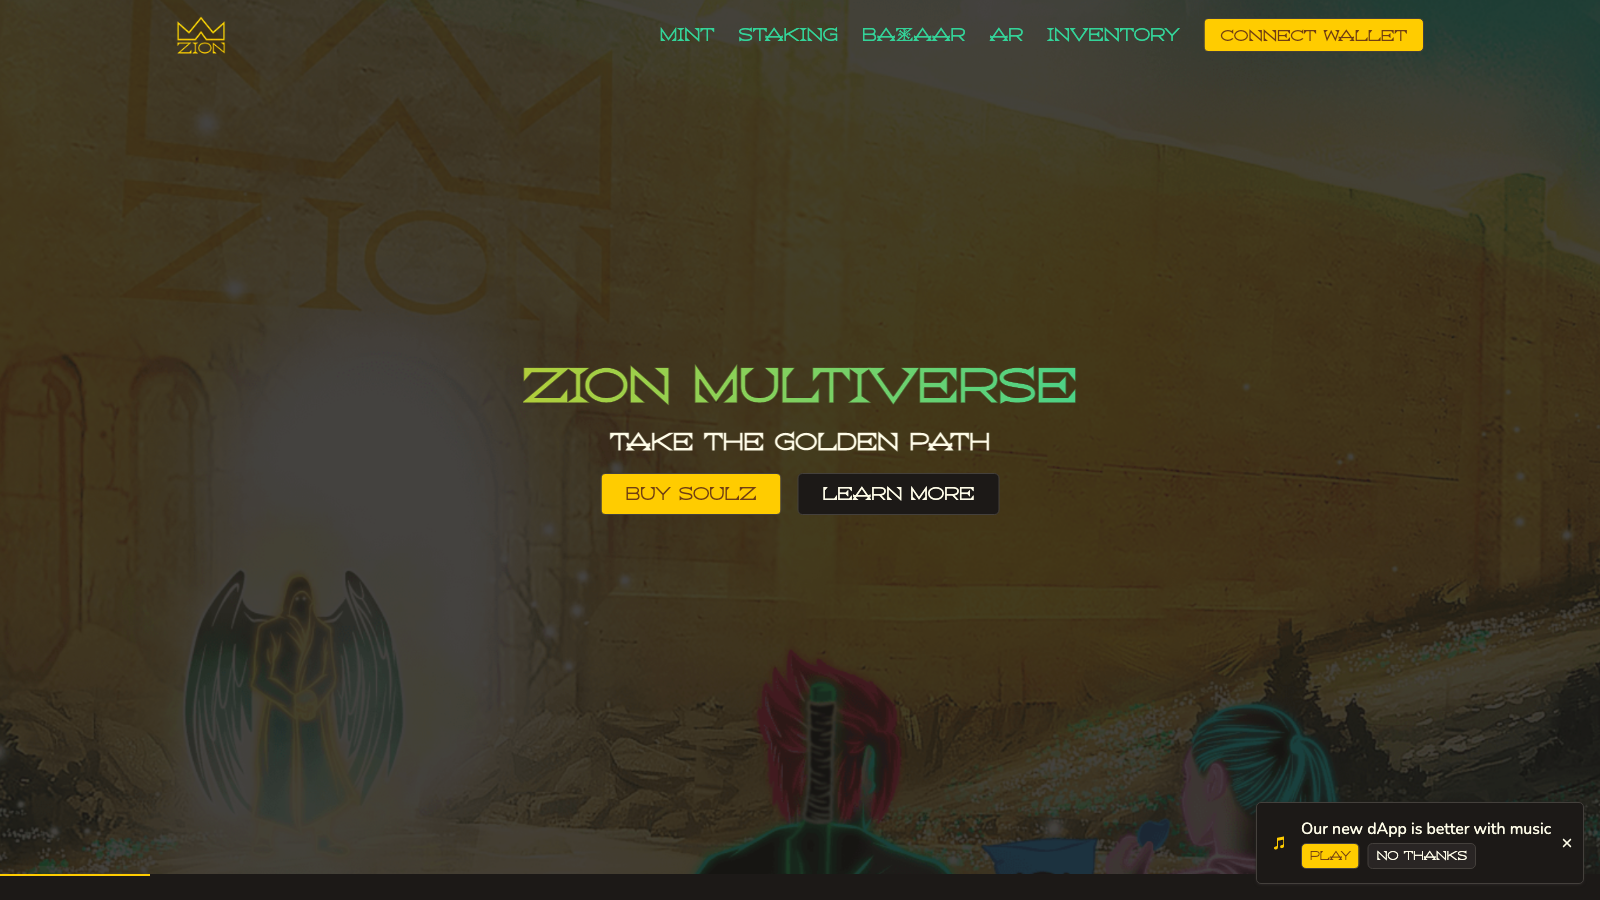 Image of the zion website